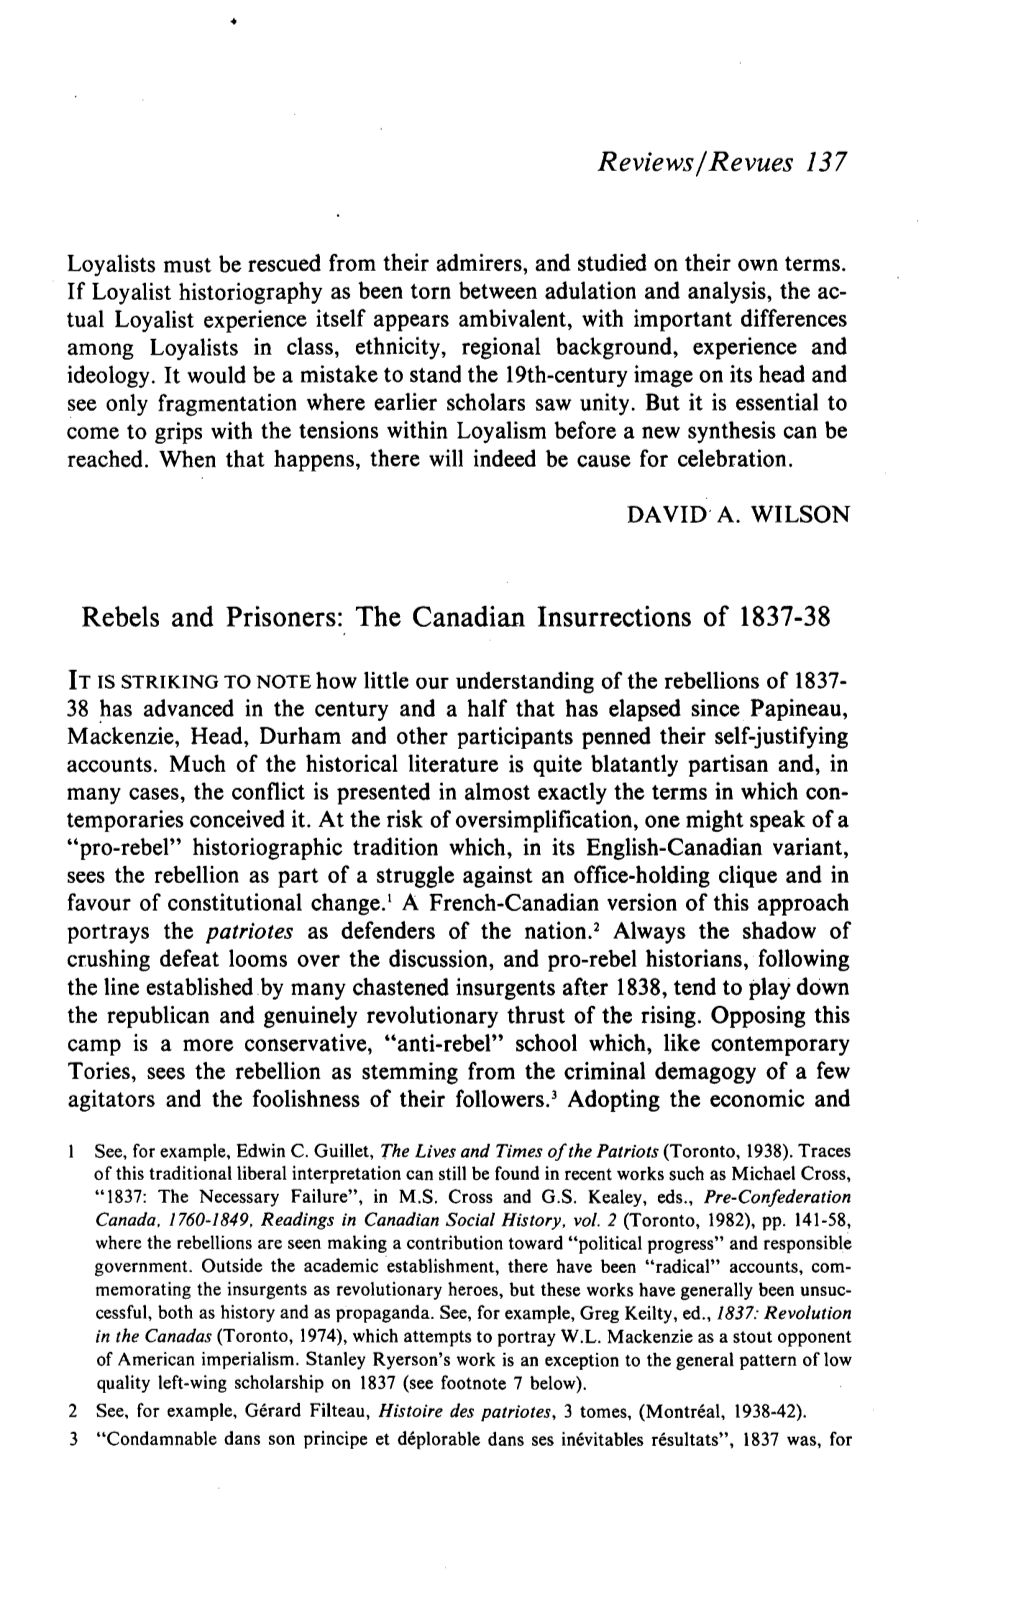 The Canadian Insurrections of 1837-38